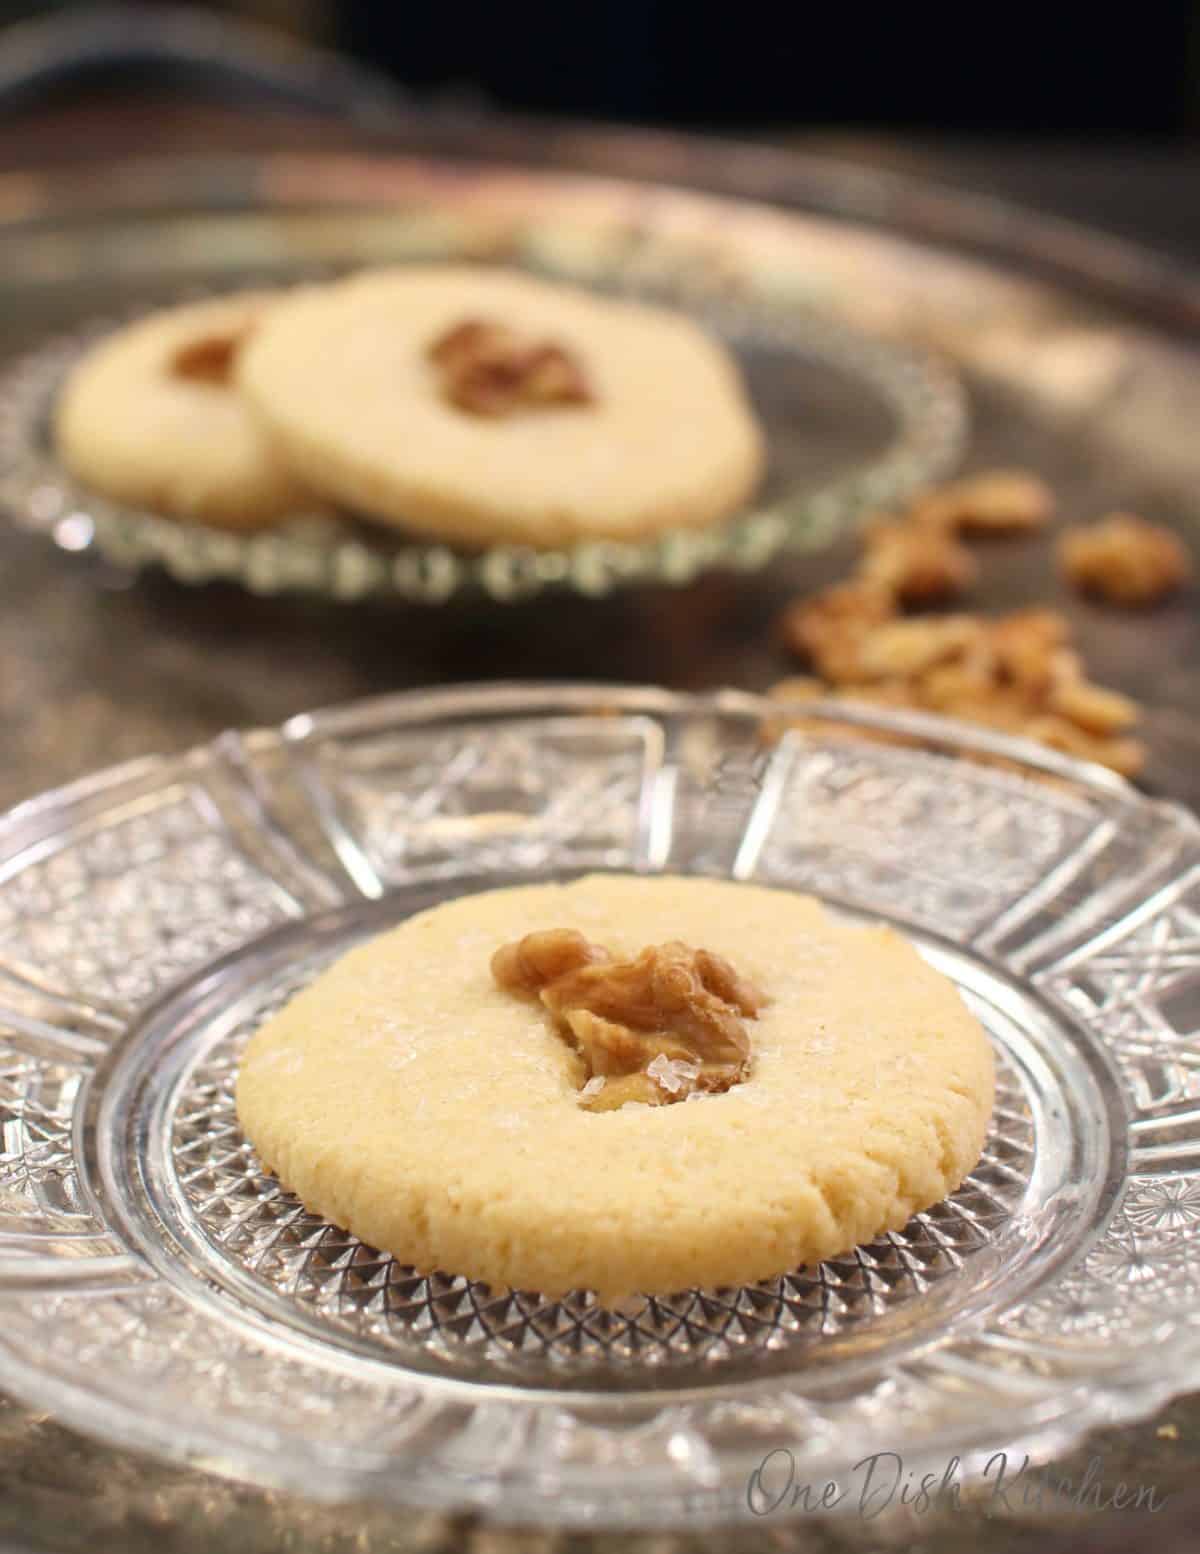 one cookie with a walnut in the center on a clear plate with two cookies in the background.